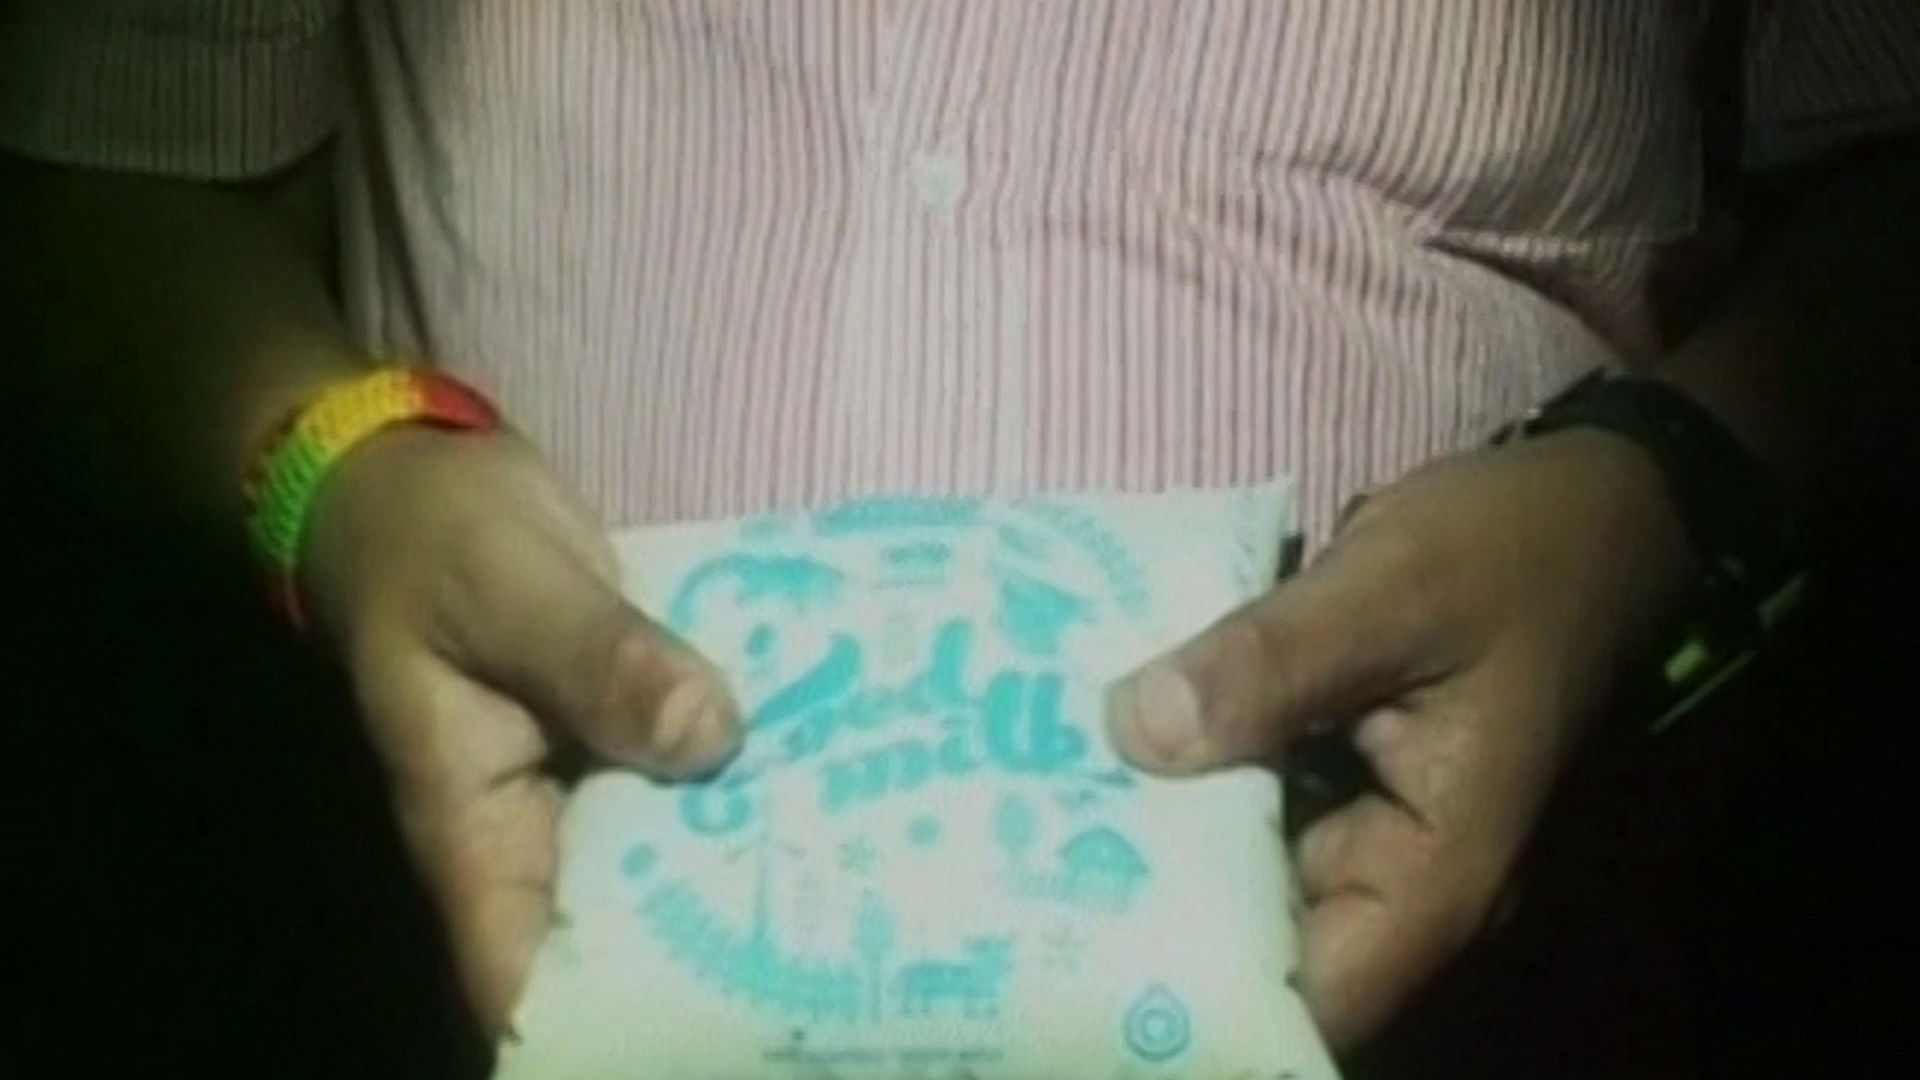 Consumer holding a Mother Dairy milk packet in Agra. (Courtesy: ANI)